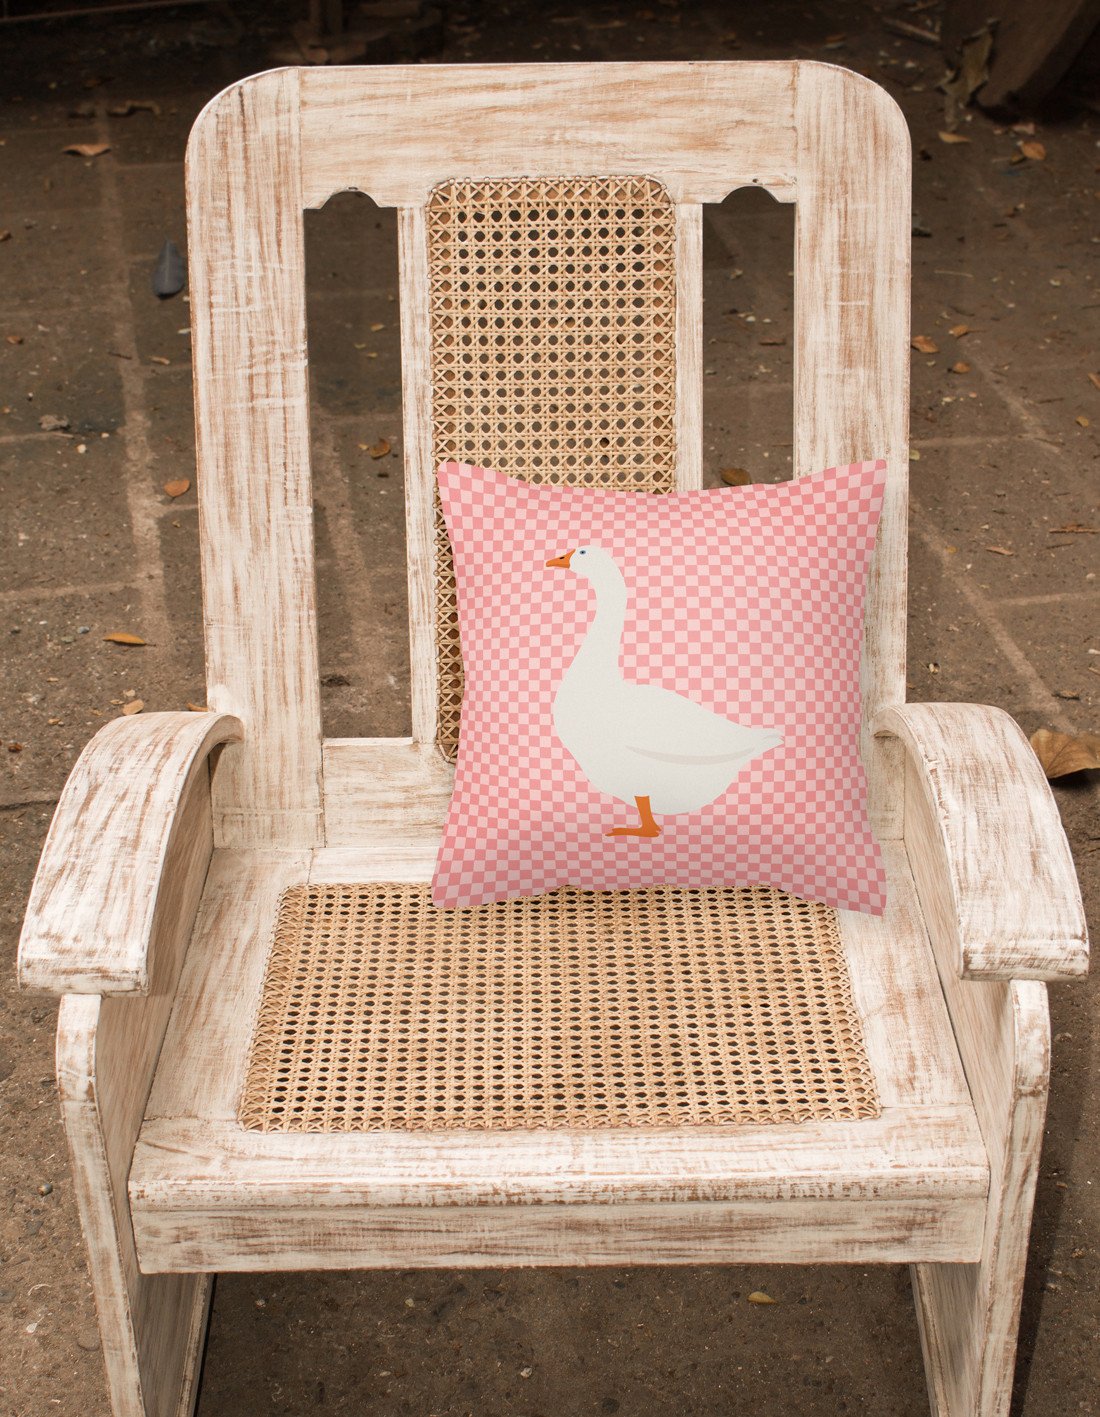 Embden Goose Pink Check Fabric Decorative Pillow BB7892PW1818 by Caroline's Treasures